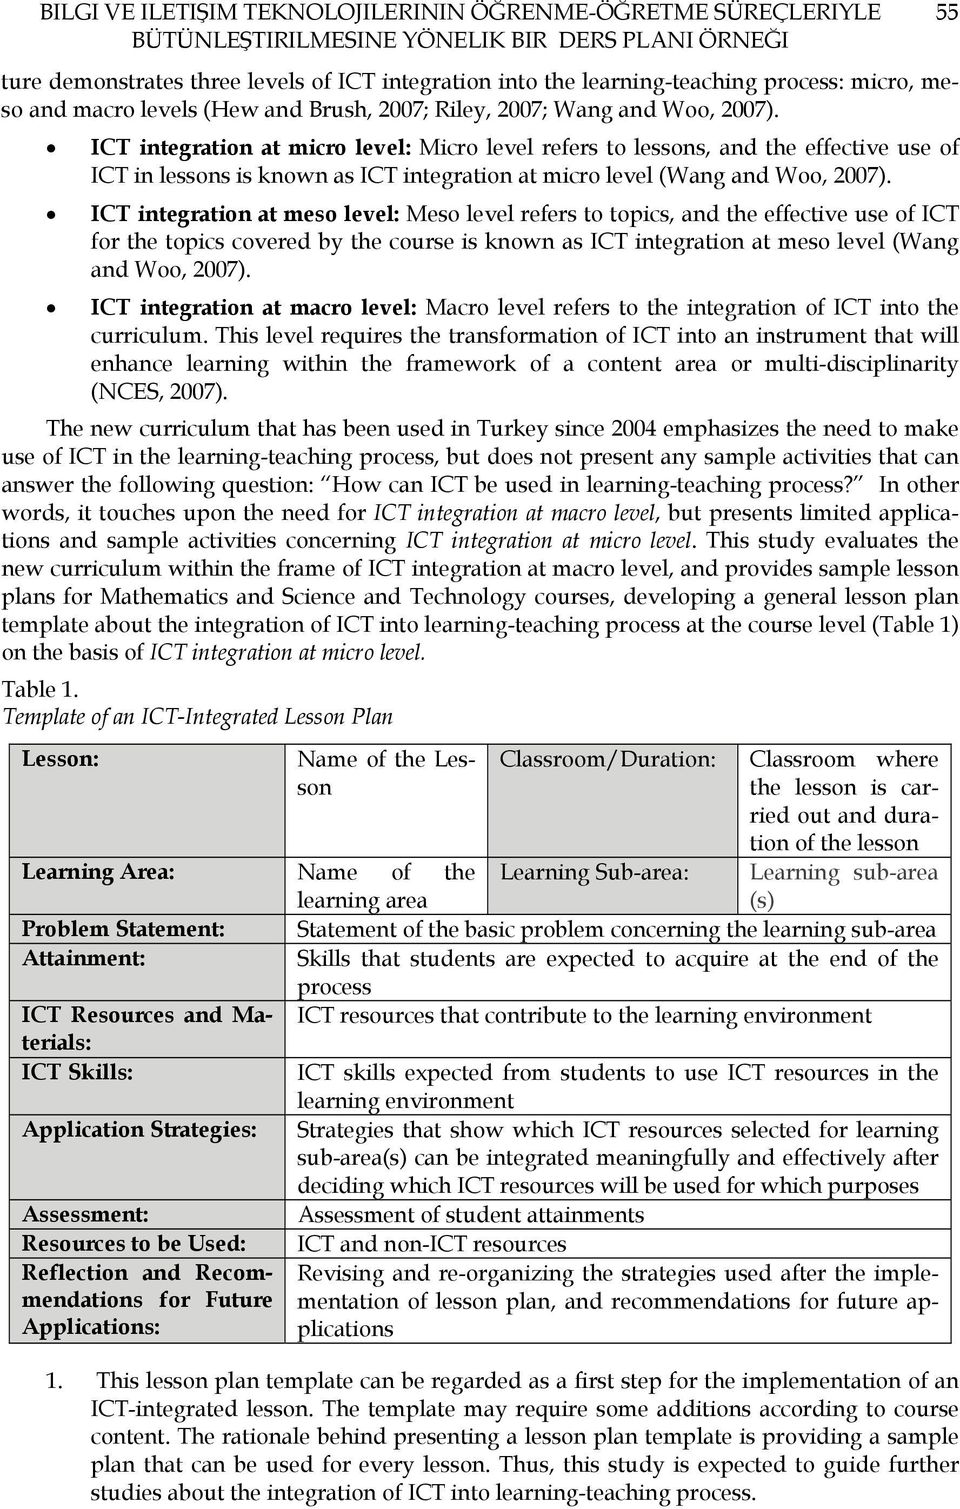 ICT integration at micro level: Micro level refers to lessons, and the effective use of ICT in lessons is known as ICT integration at micro level (Wang and Woo, 2007).